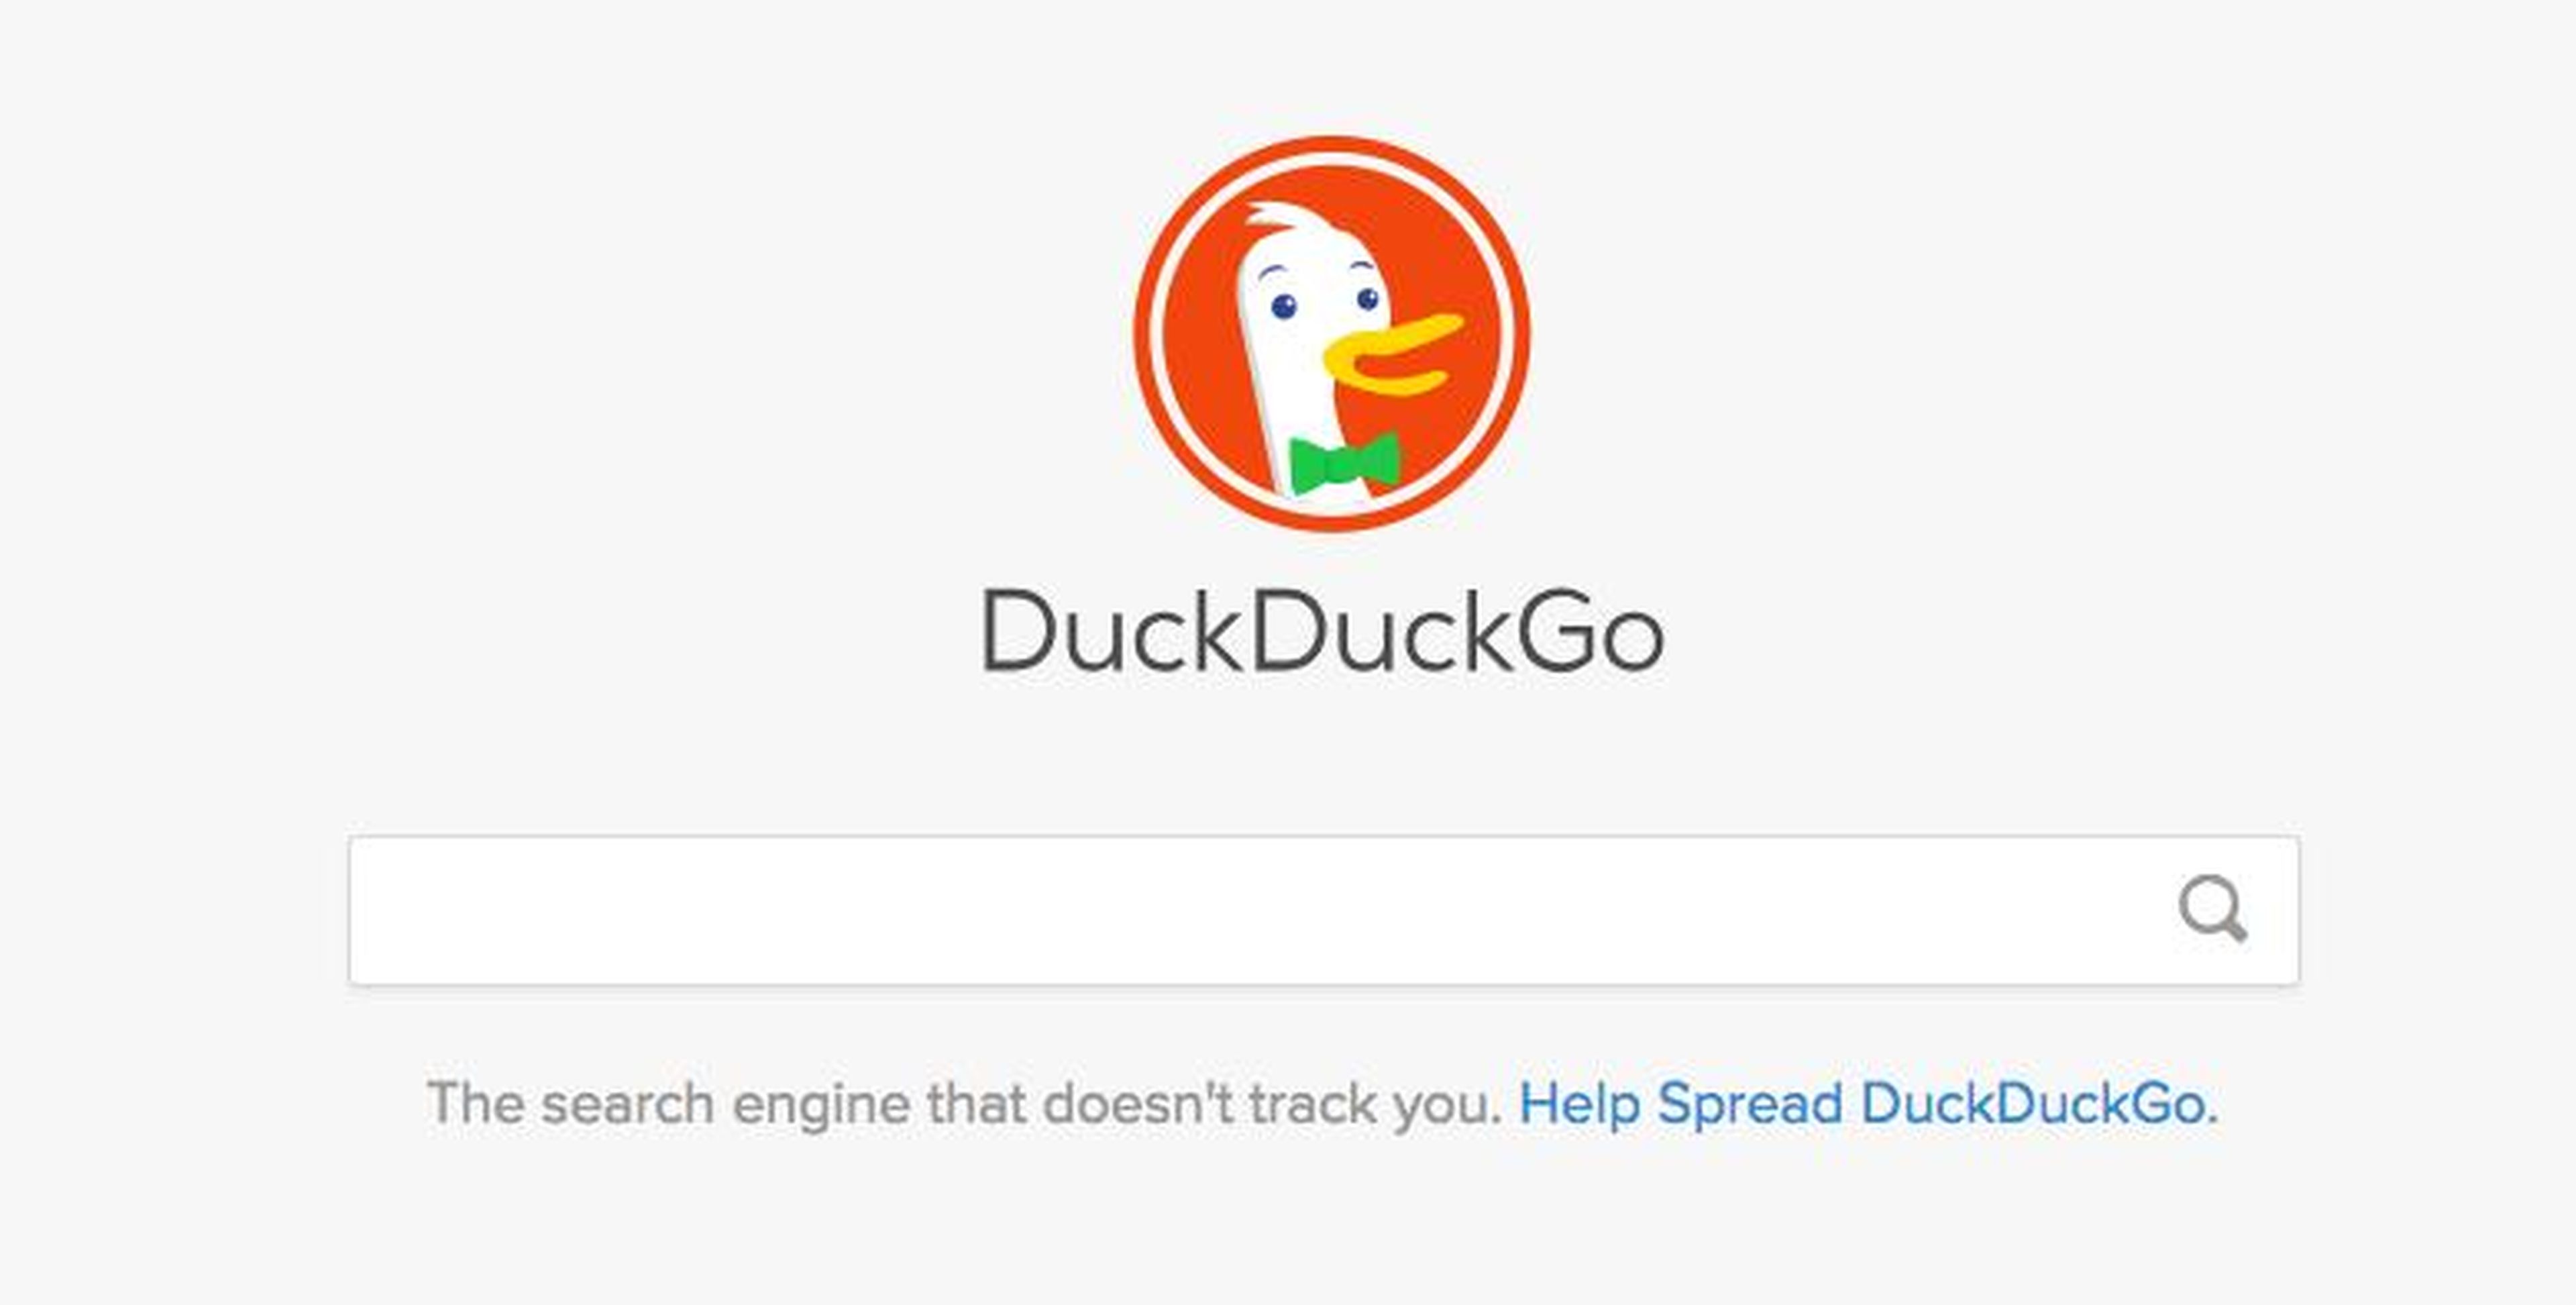 When it comes to search, check out DuckDuckGo.